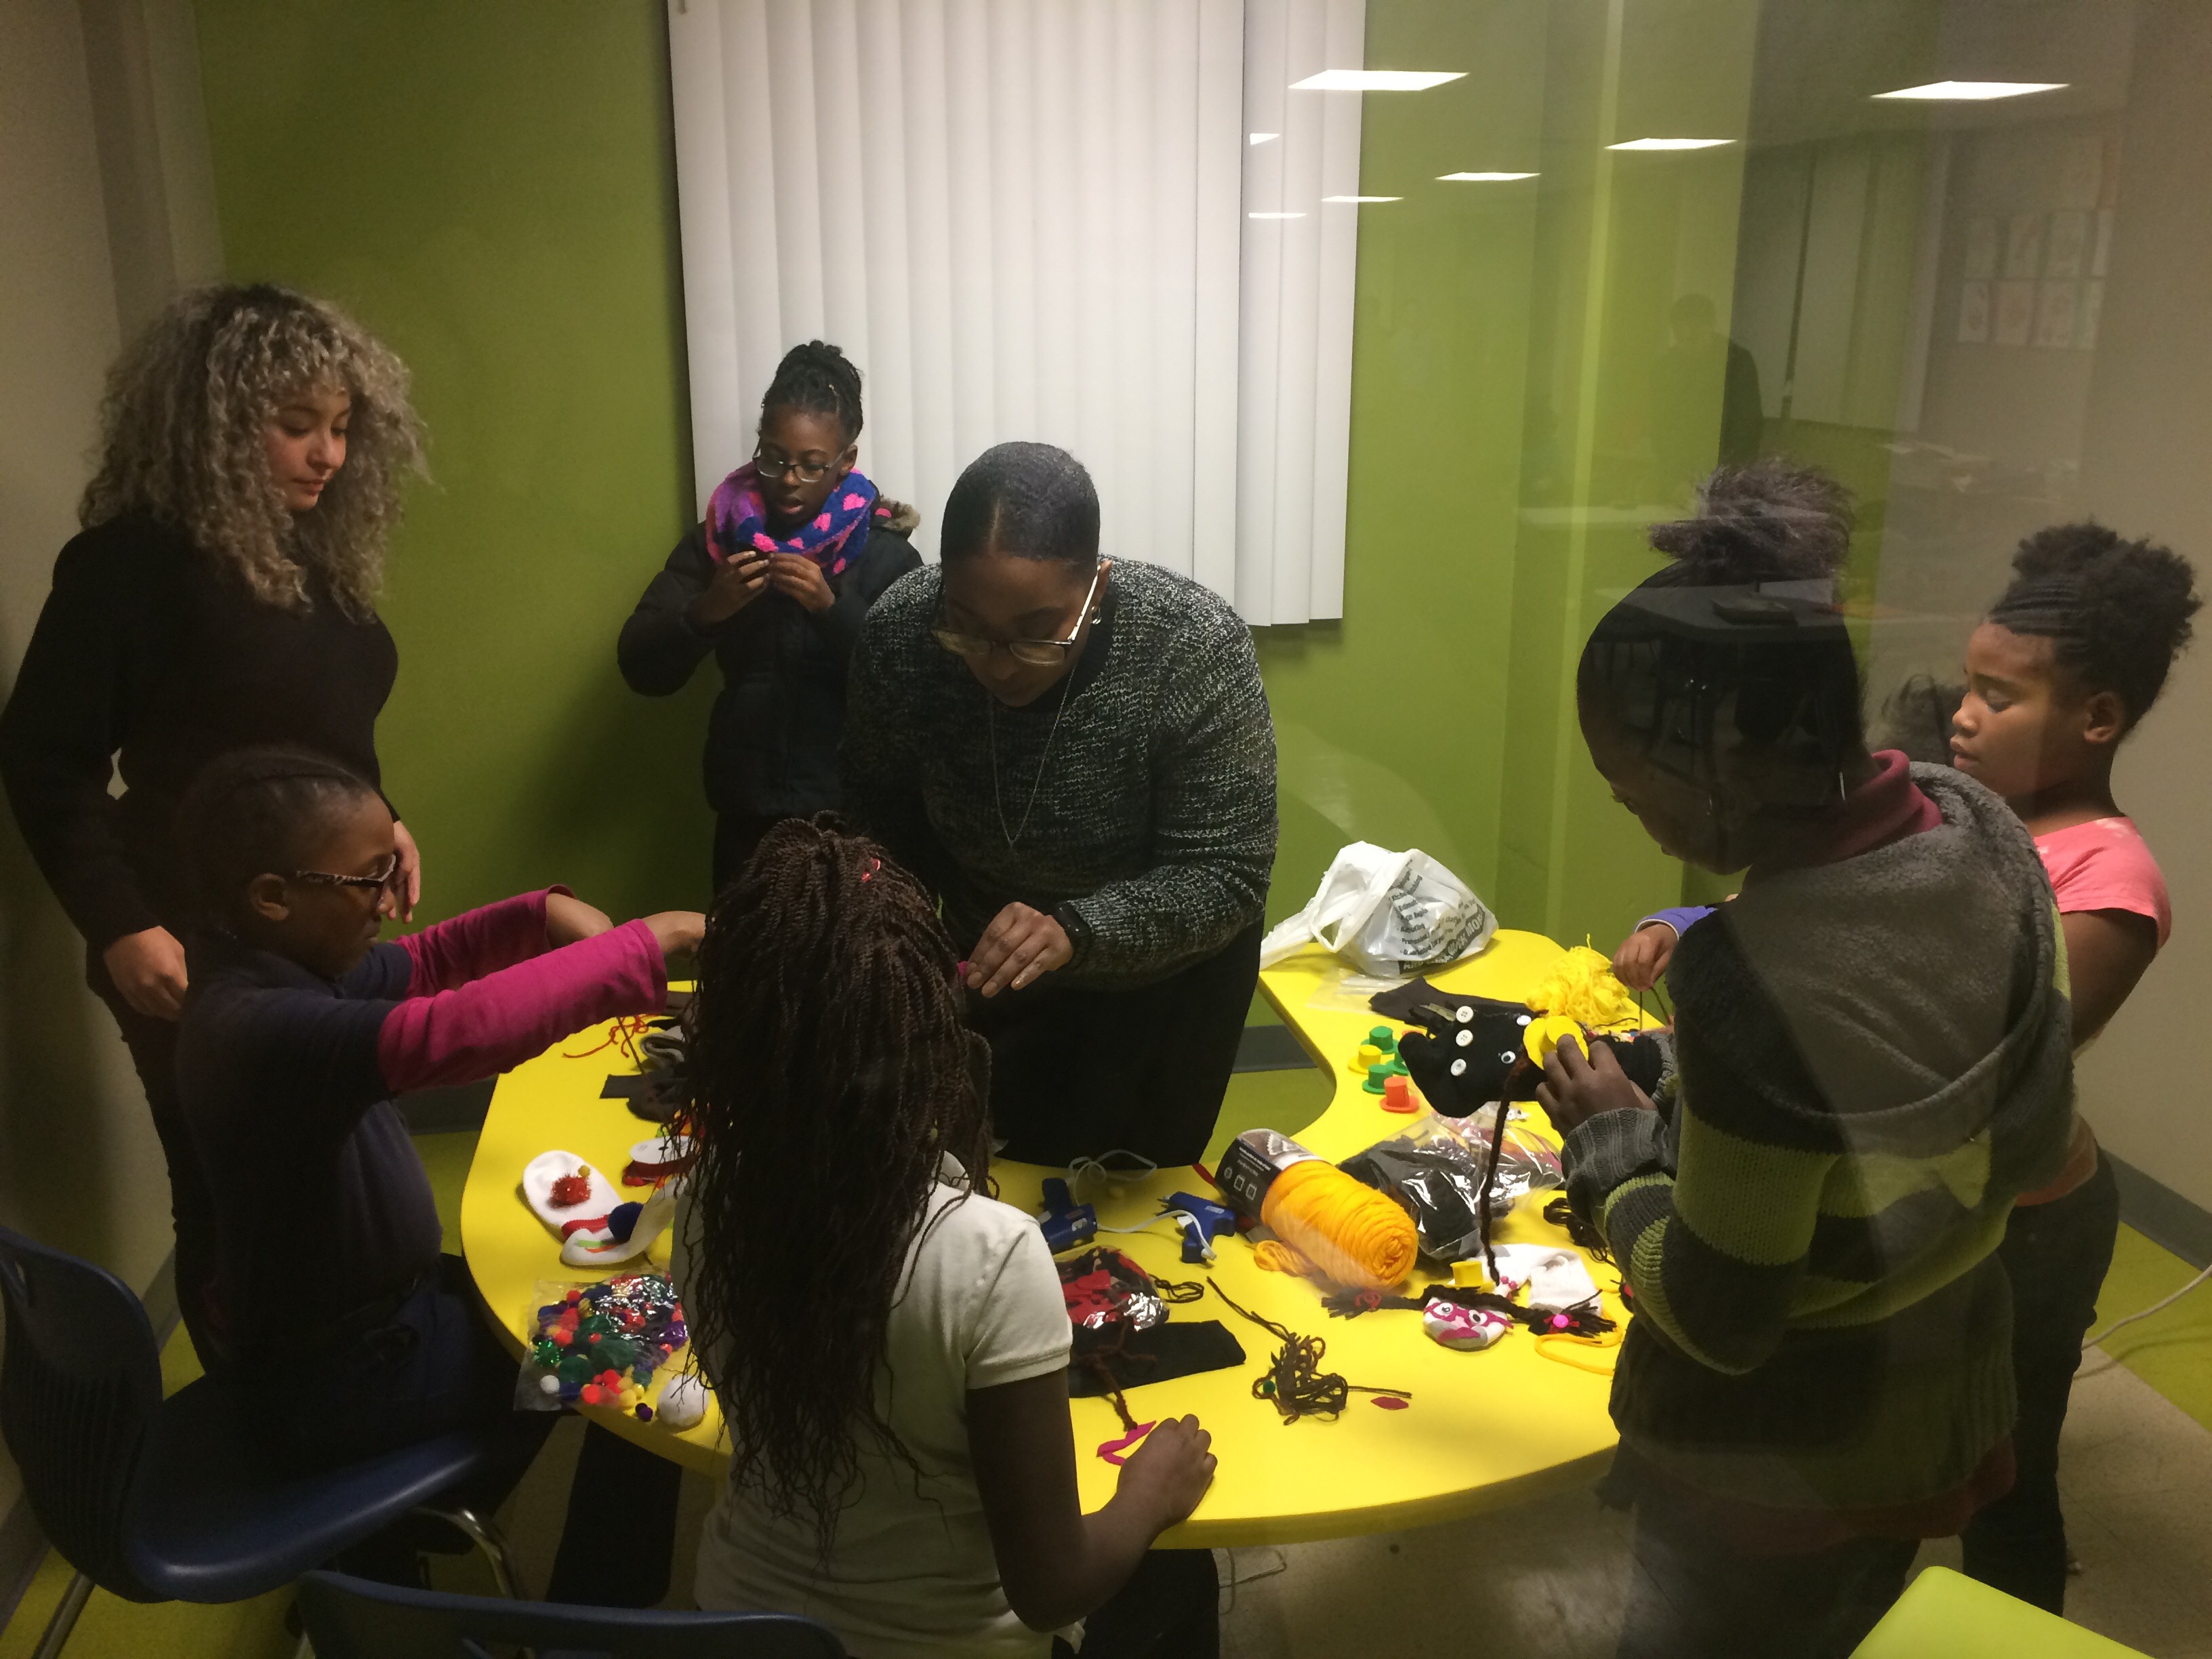  - One of our Forensic students working with youth from The Community Builders Inc. to create sock puppets - Nov 2017